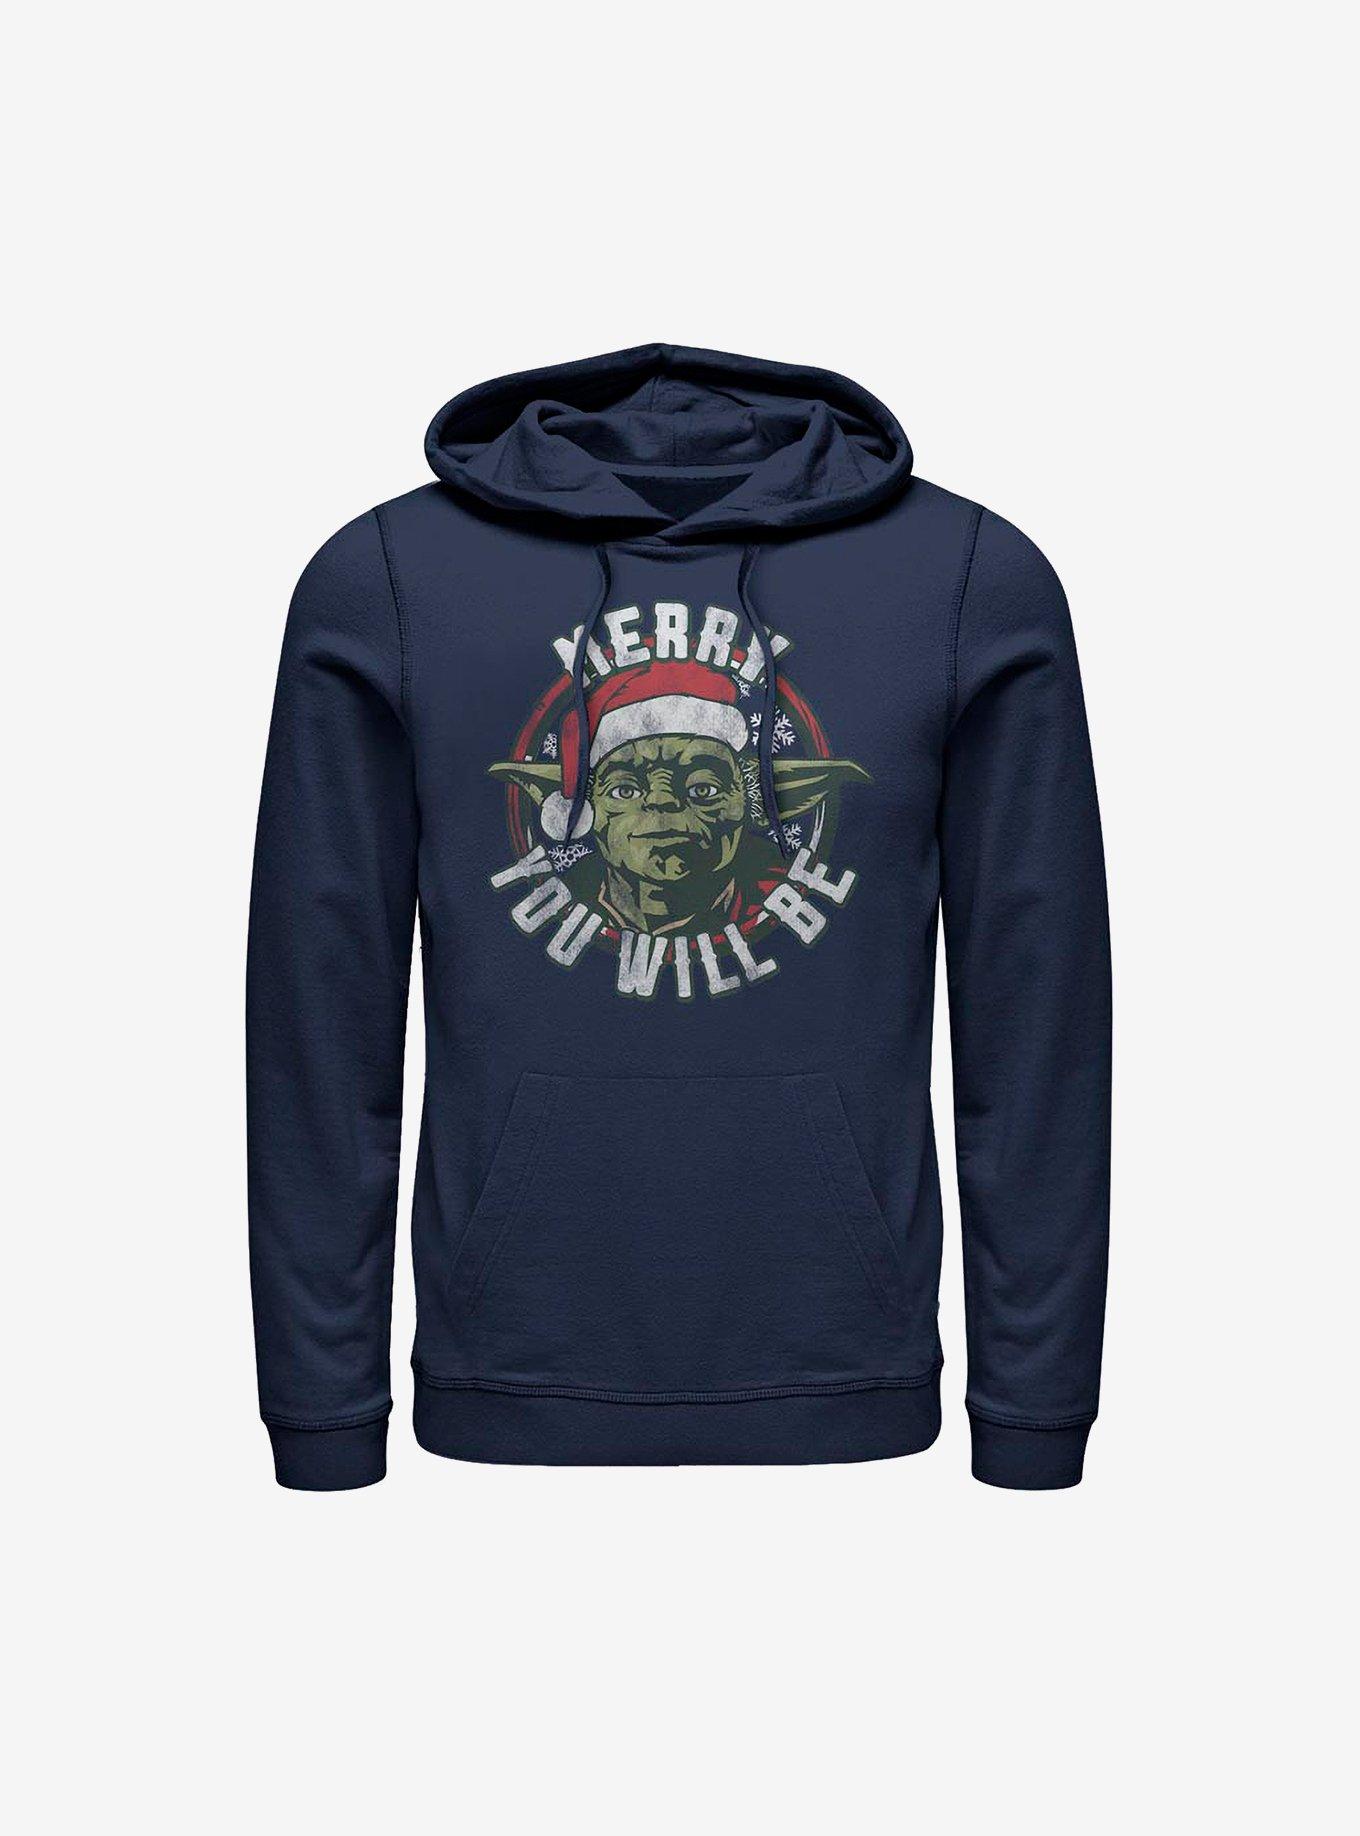 Star Wars Merry You Will Be Holiday Hoodie, NAVY, hi-res